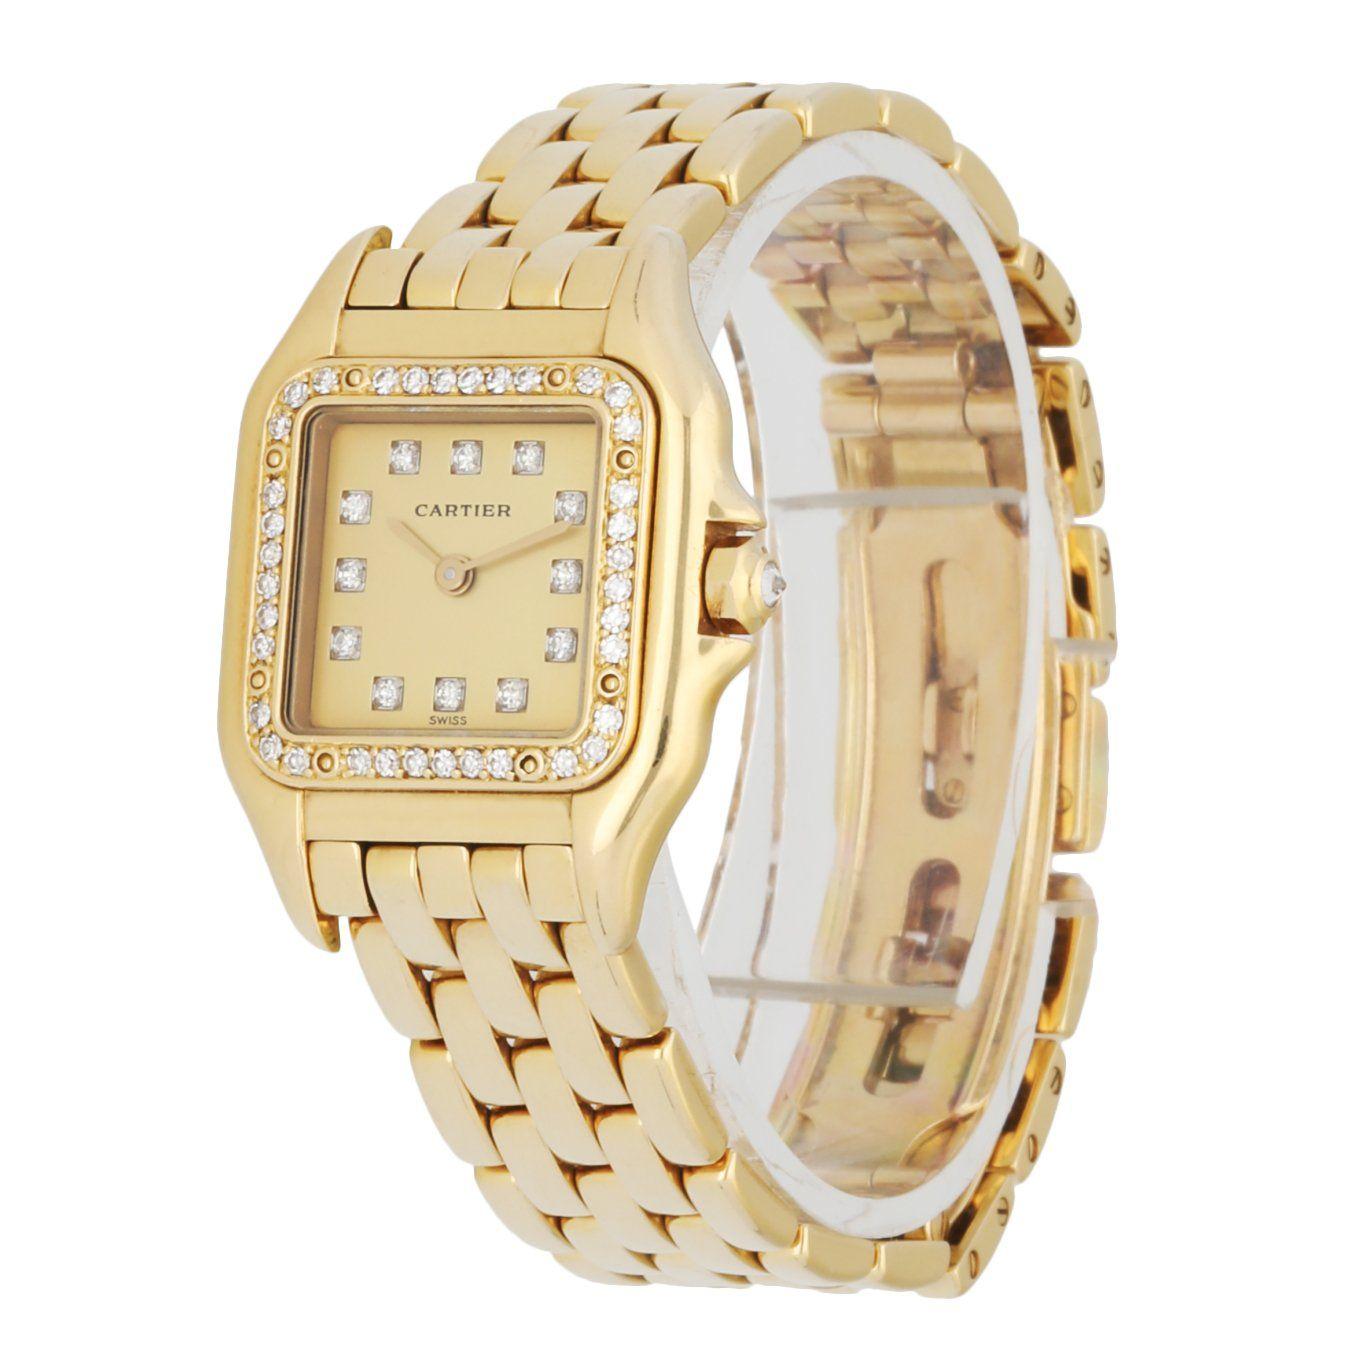 Cartier Panthere 8057915 ladies watch. 22mm 18K yellow gold case. 18K yellow gold andÂ factory diamond set bezel. Gold dial with factory diamond hour markers and gold hands. 18K yellow gold bracelet with an 18K yellow gold hidden butterfly clasp.